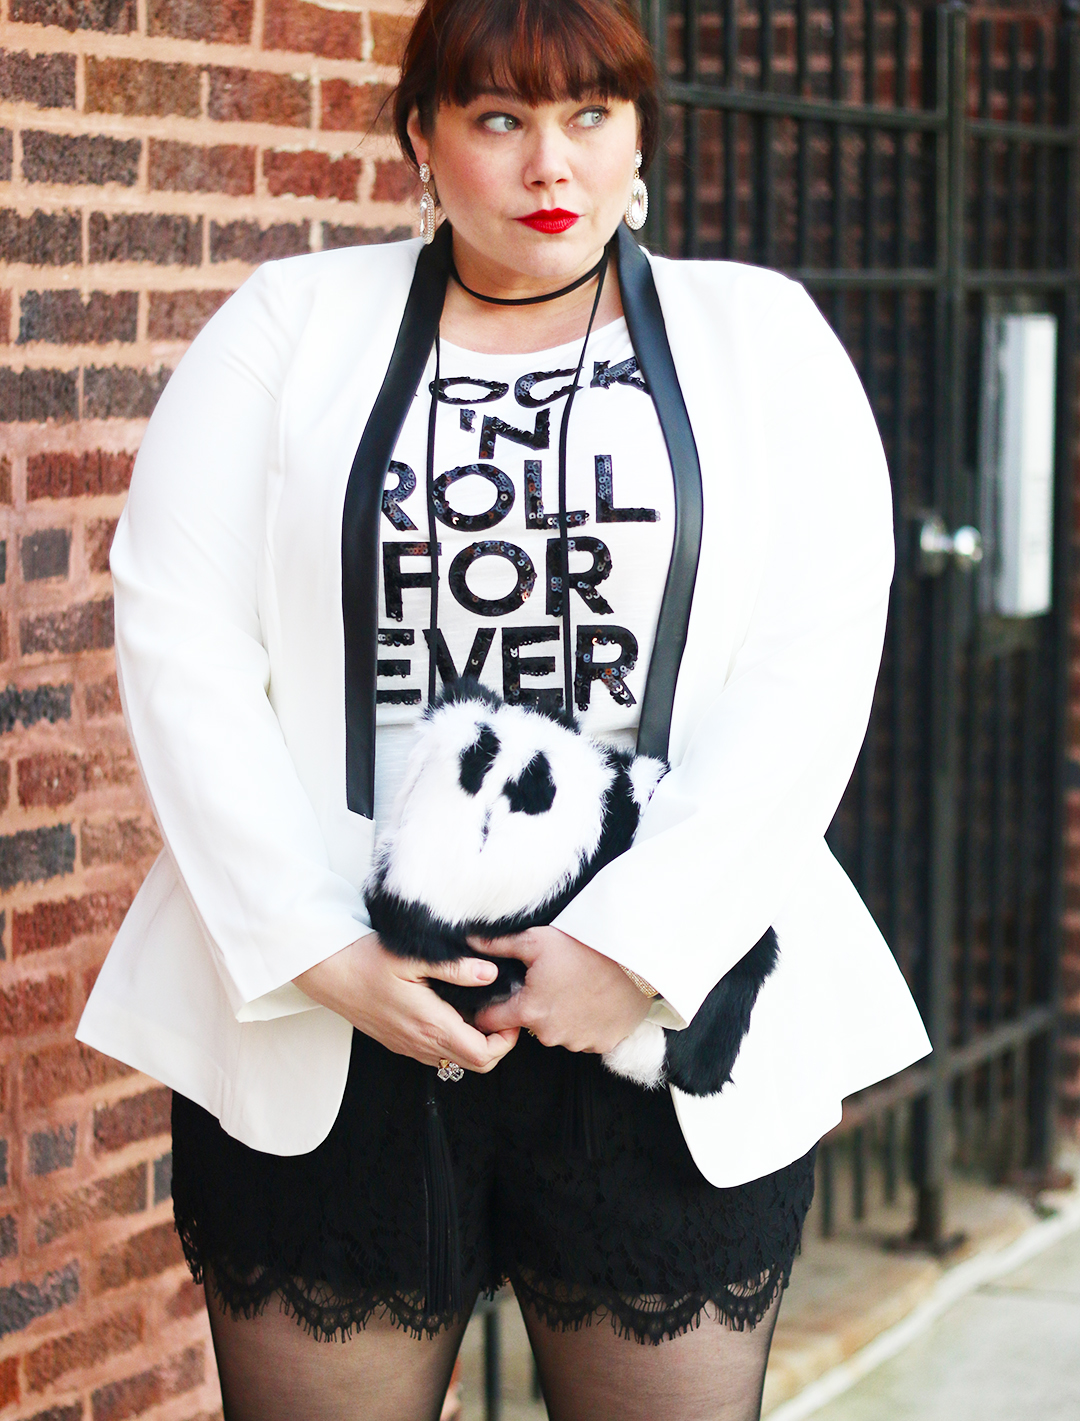 Plus Size Blogger Amber in a White Blazer and Lace Shorts from Torrid, Holiday Style, Plus size holiday